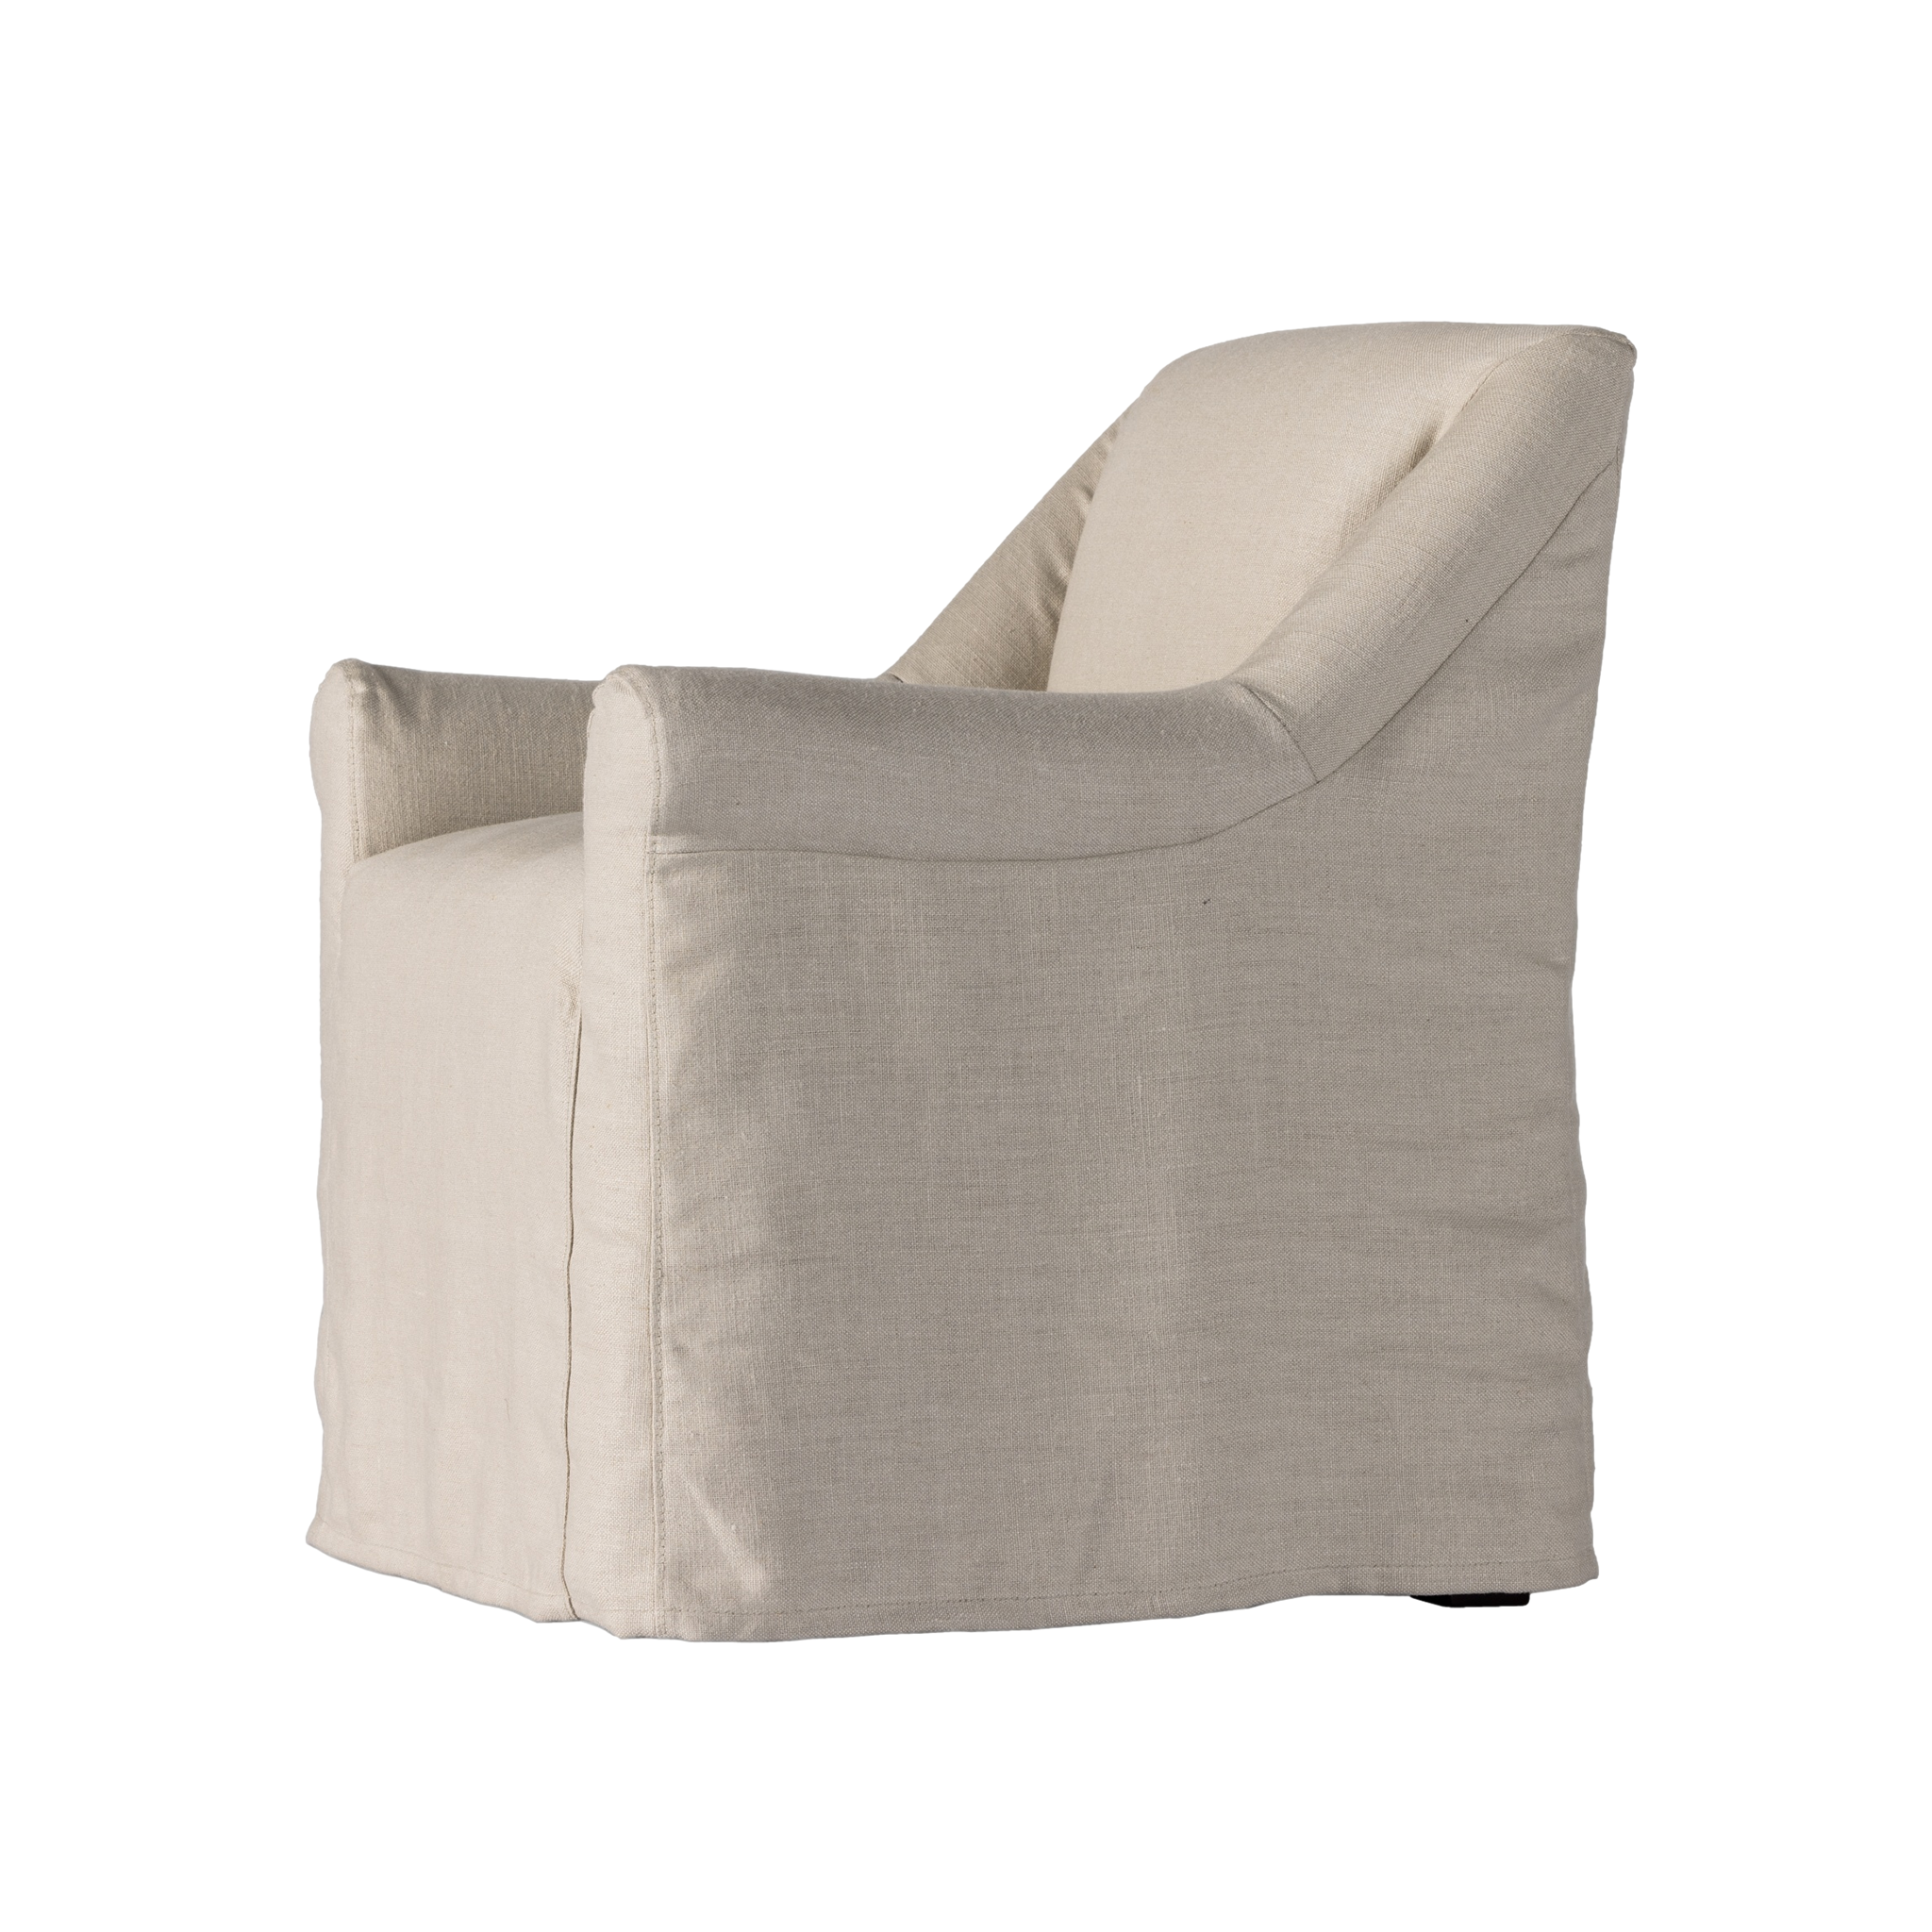 Bridges Slipcover Dining Chair in Natural